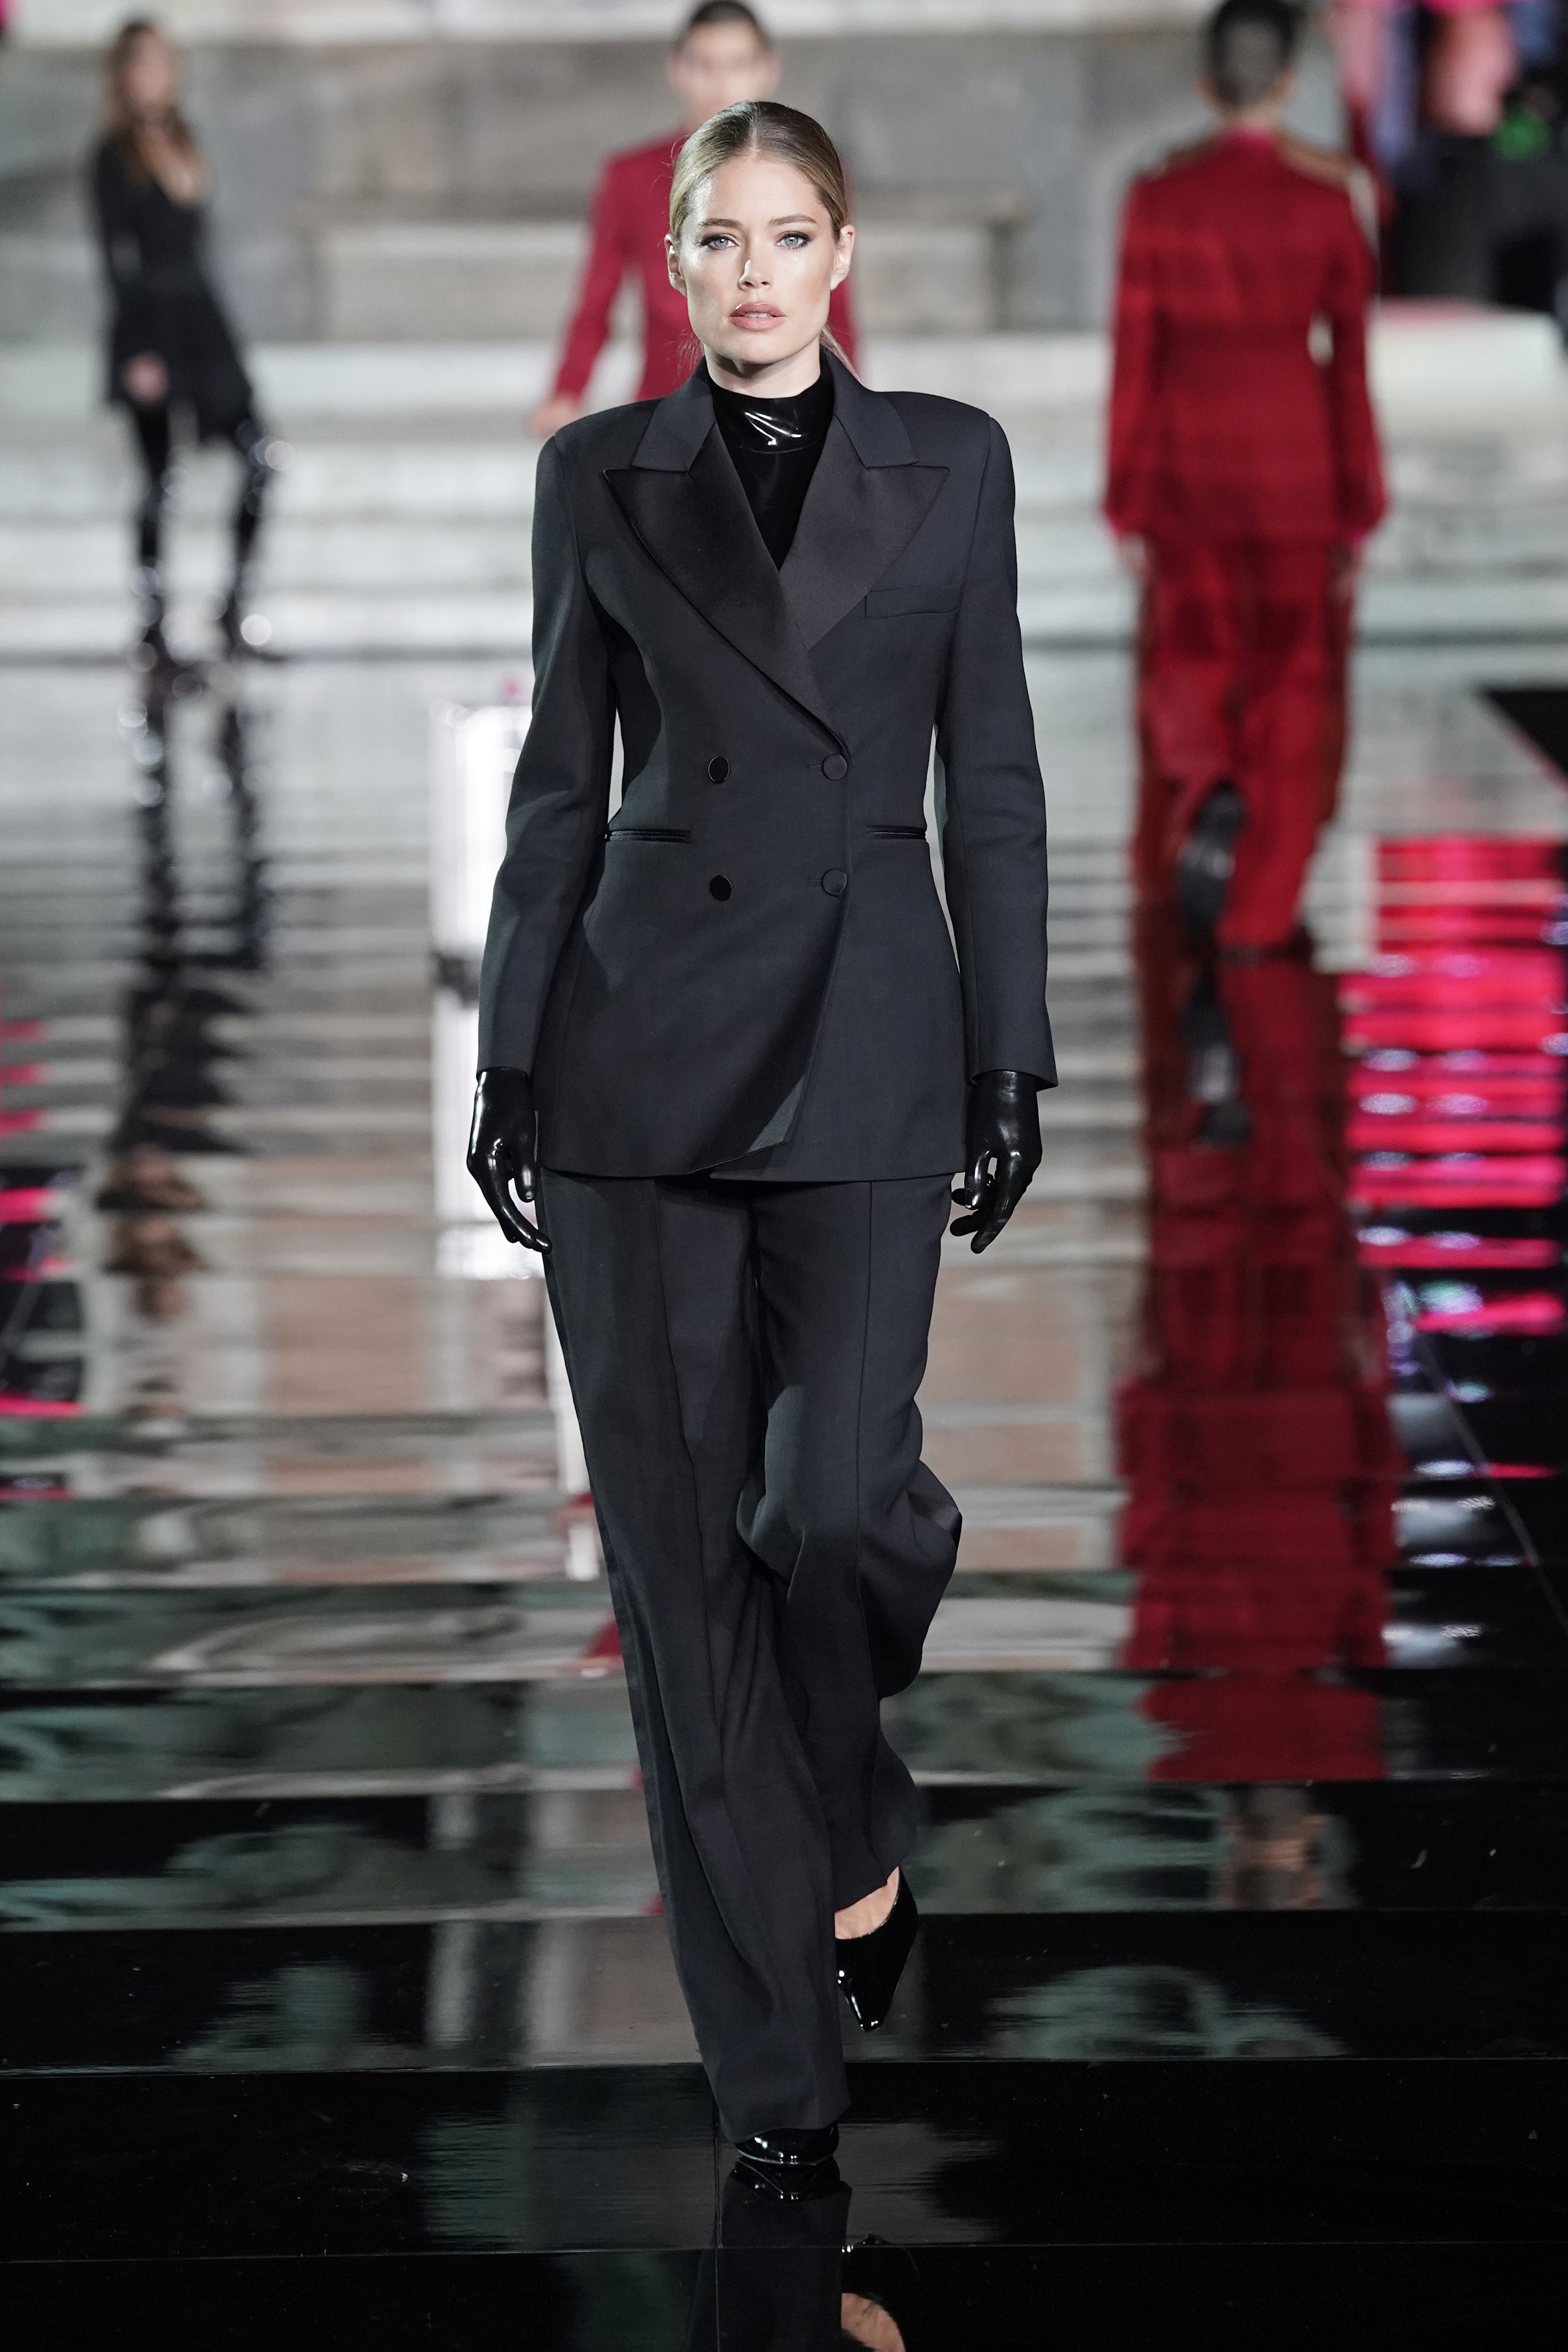 Telegraf Centimeter charme CR Runway Show - See Every Look From CR Runway